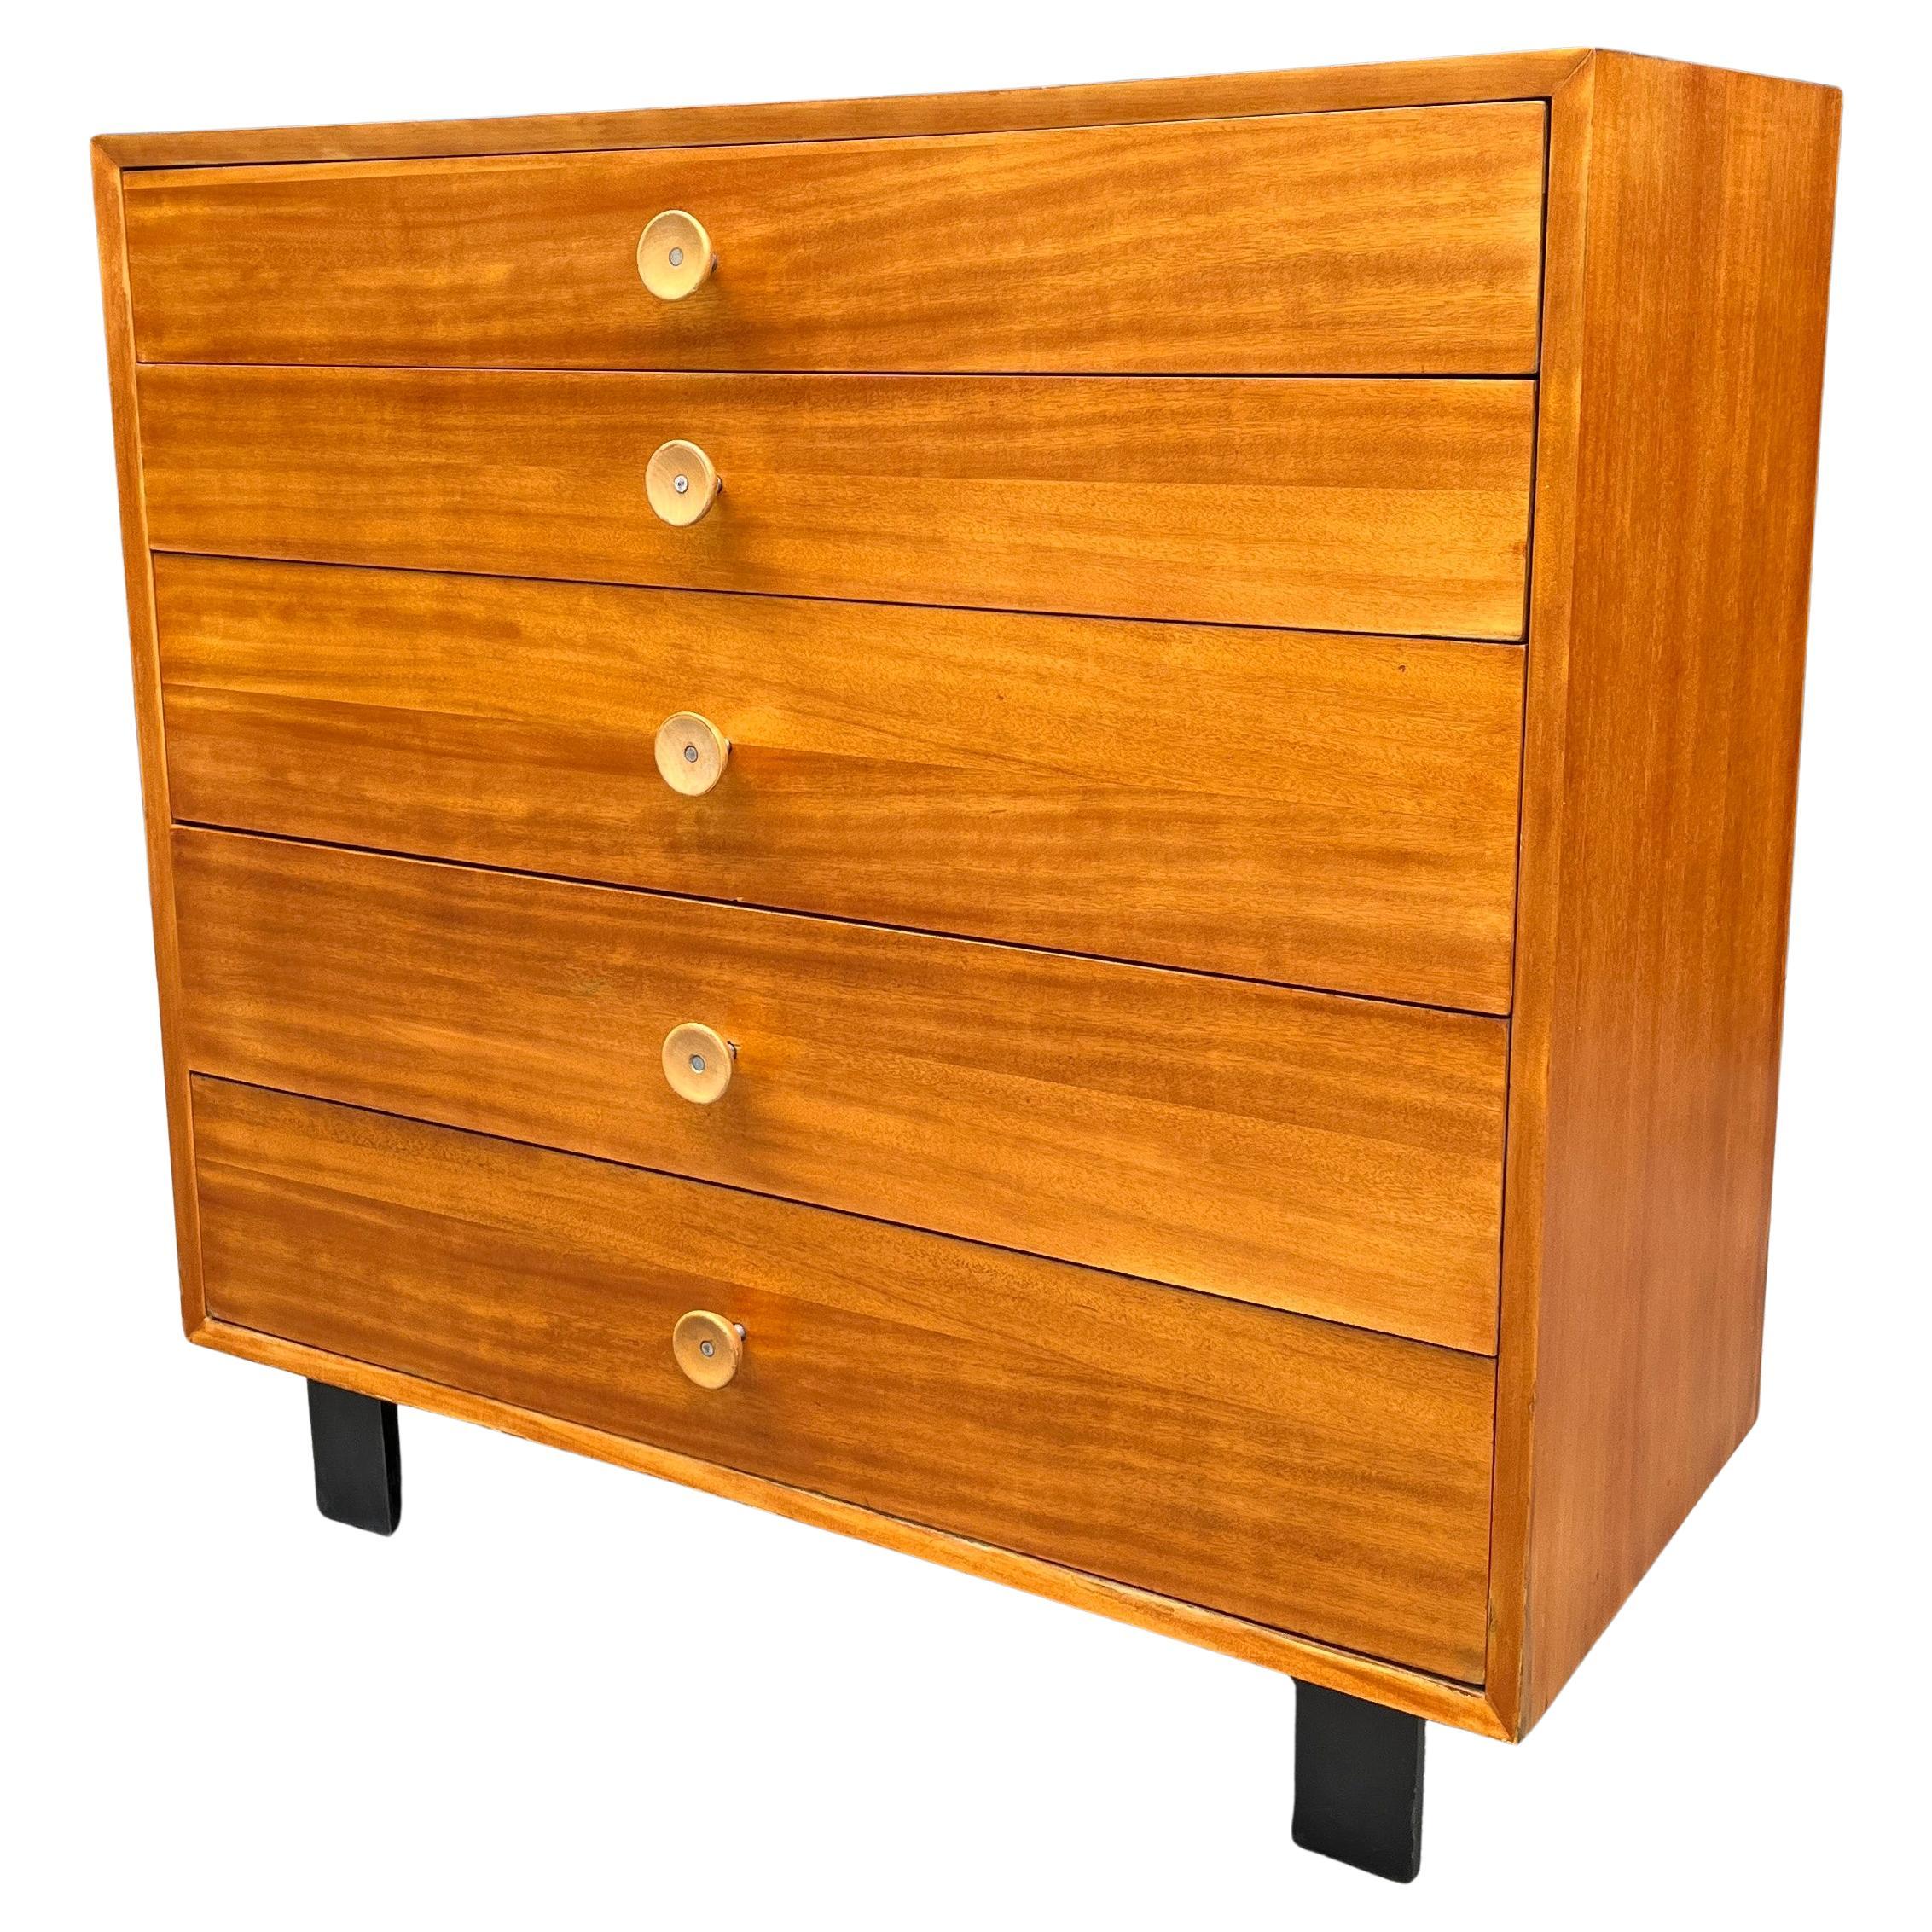 American Midcentury Dresser by George Nelson for Herman Miller